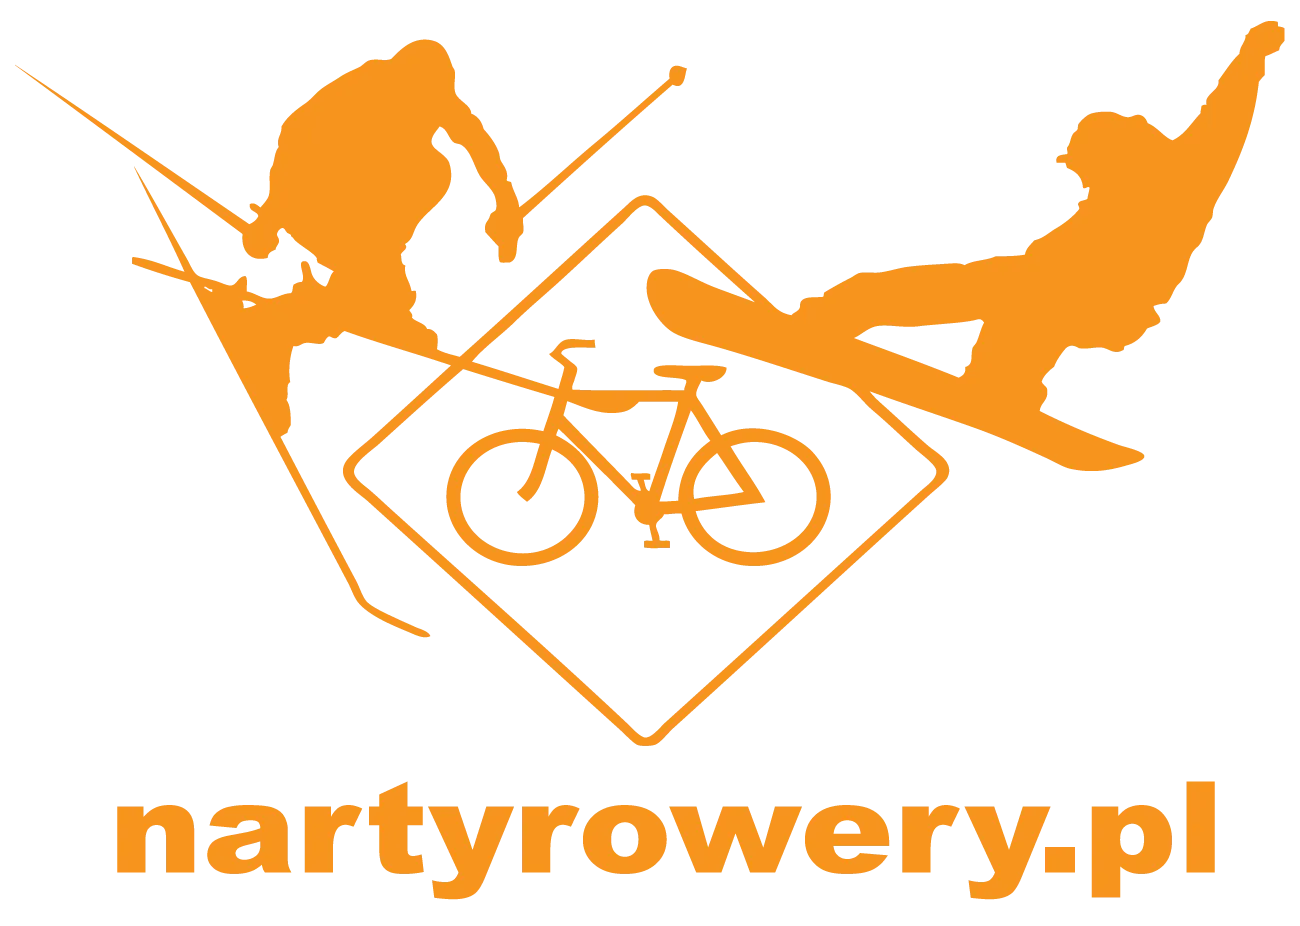 nartyrowery.pl